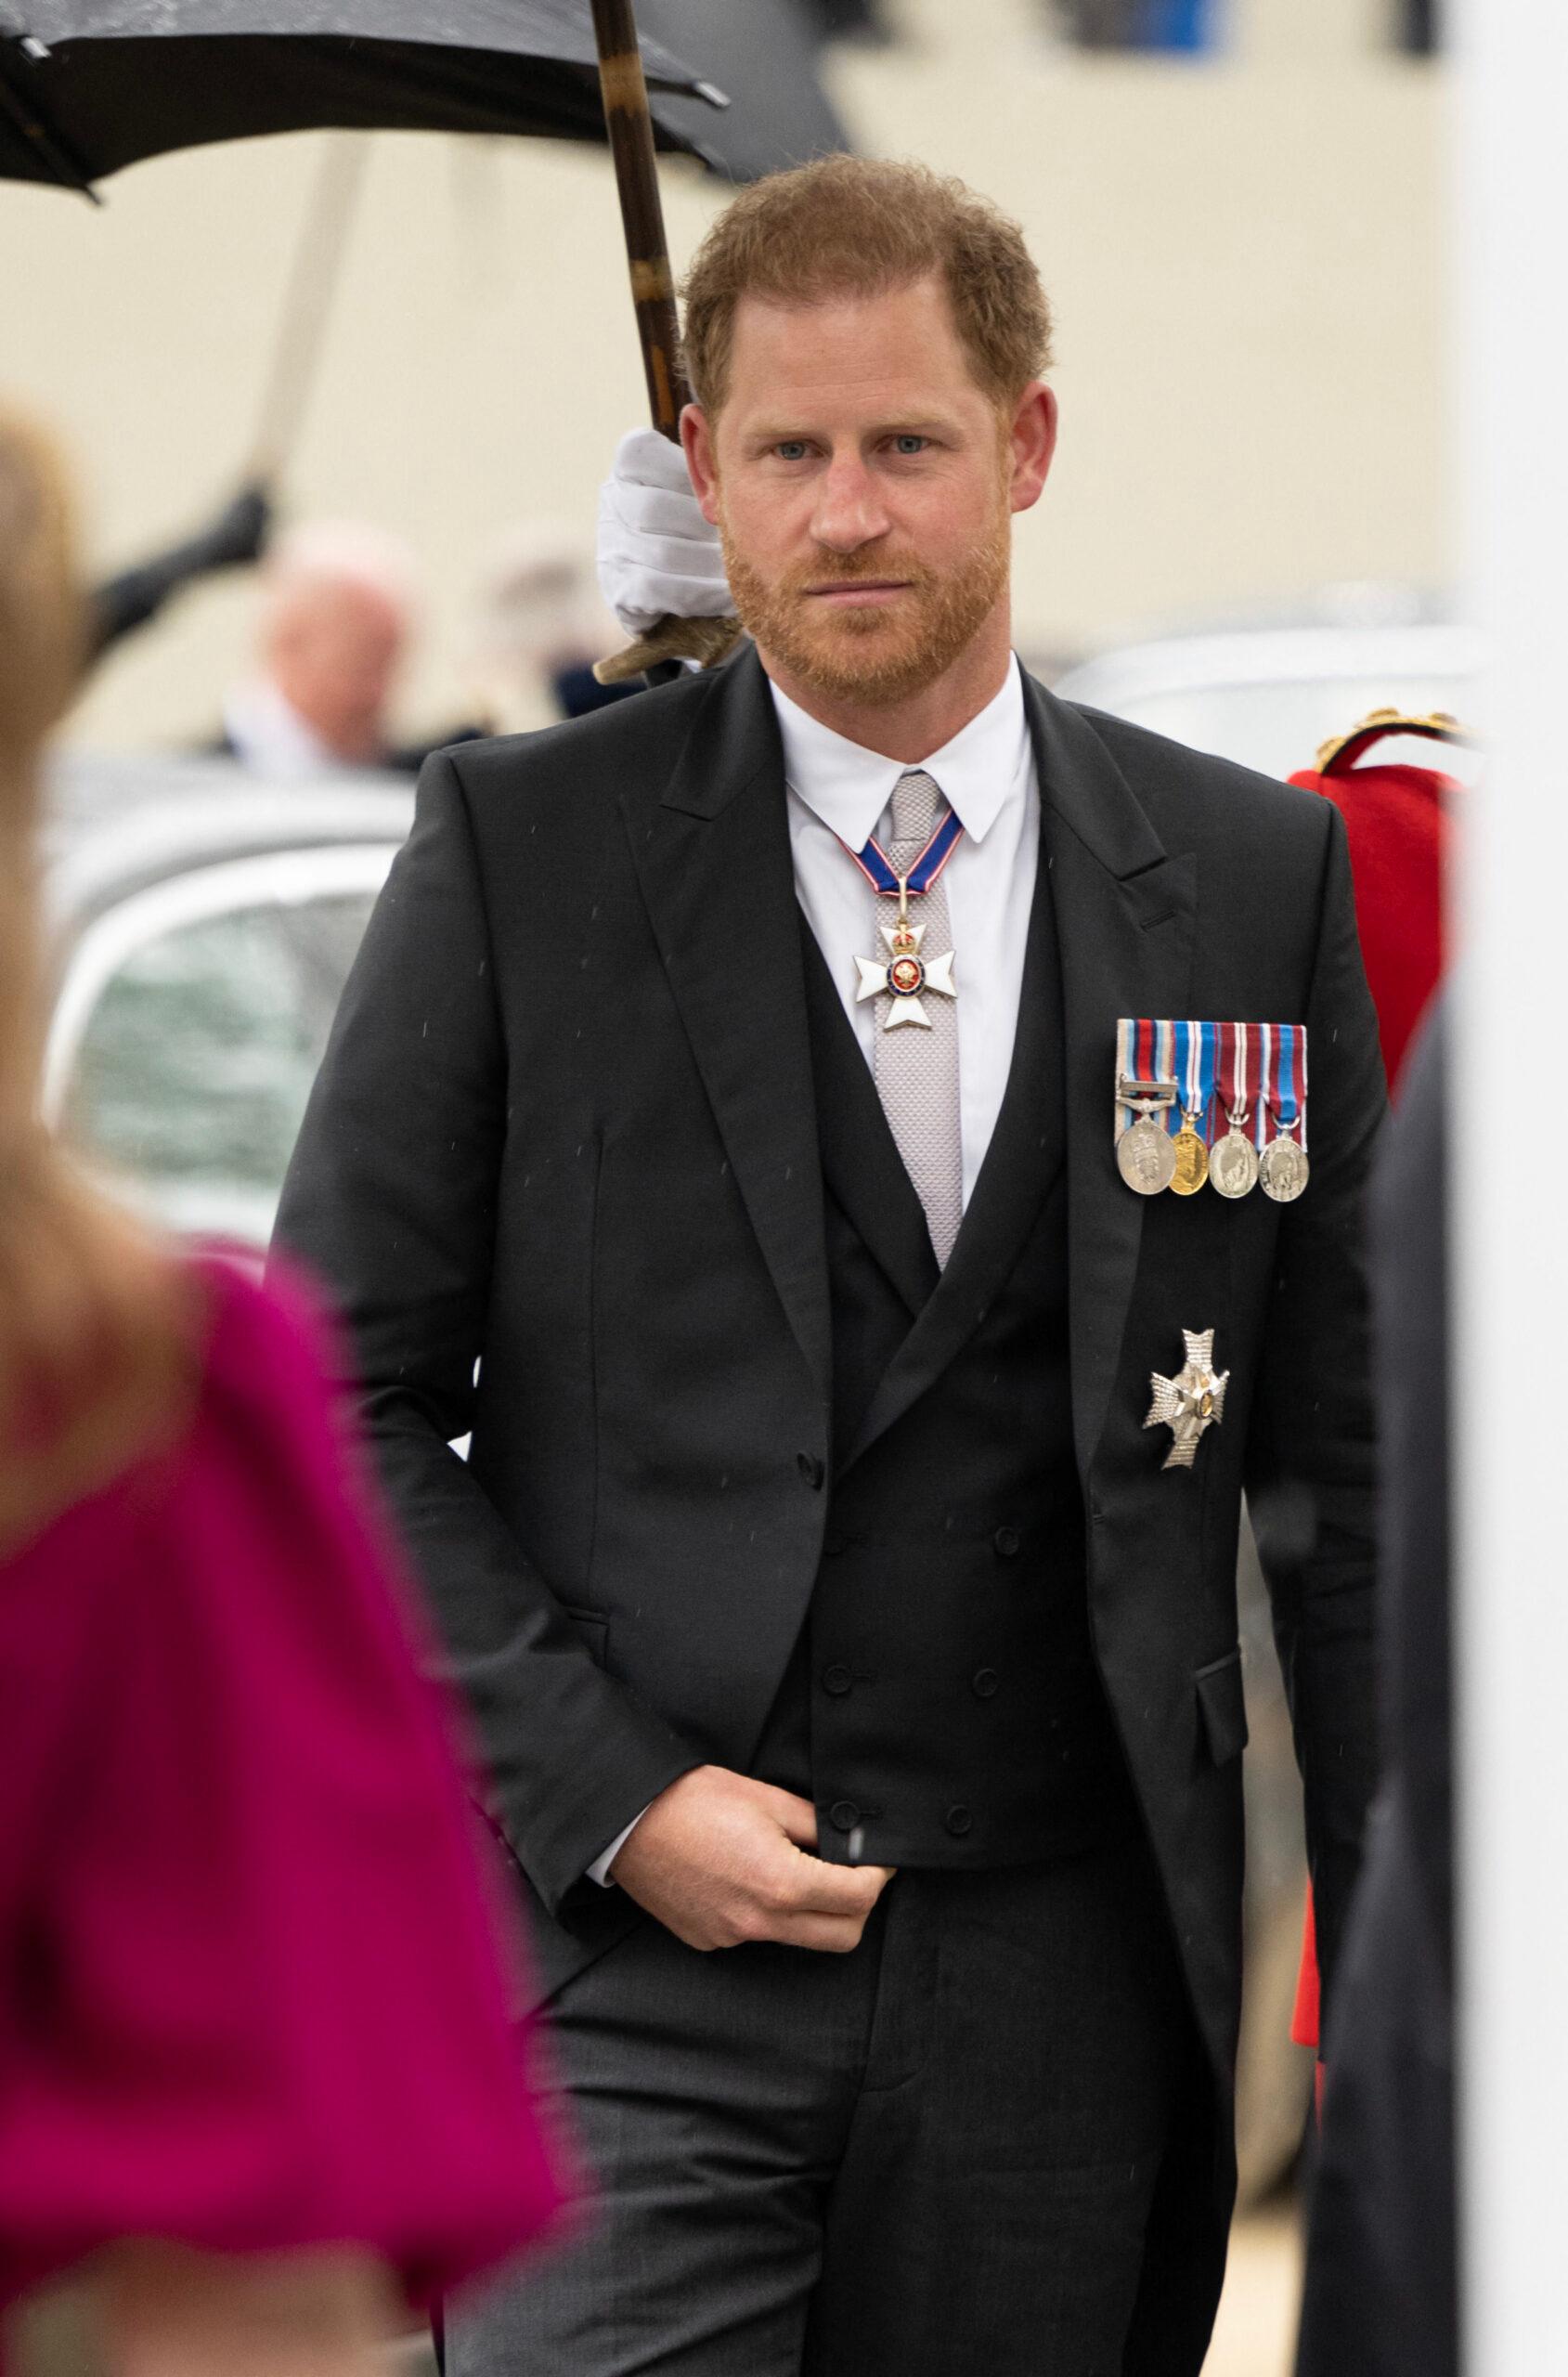 Prince Harry at the Coronation of King Charles III and Queen Consort Camilla